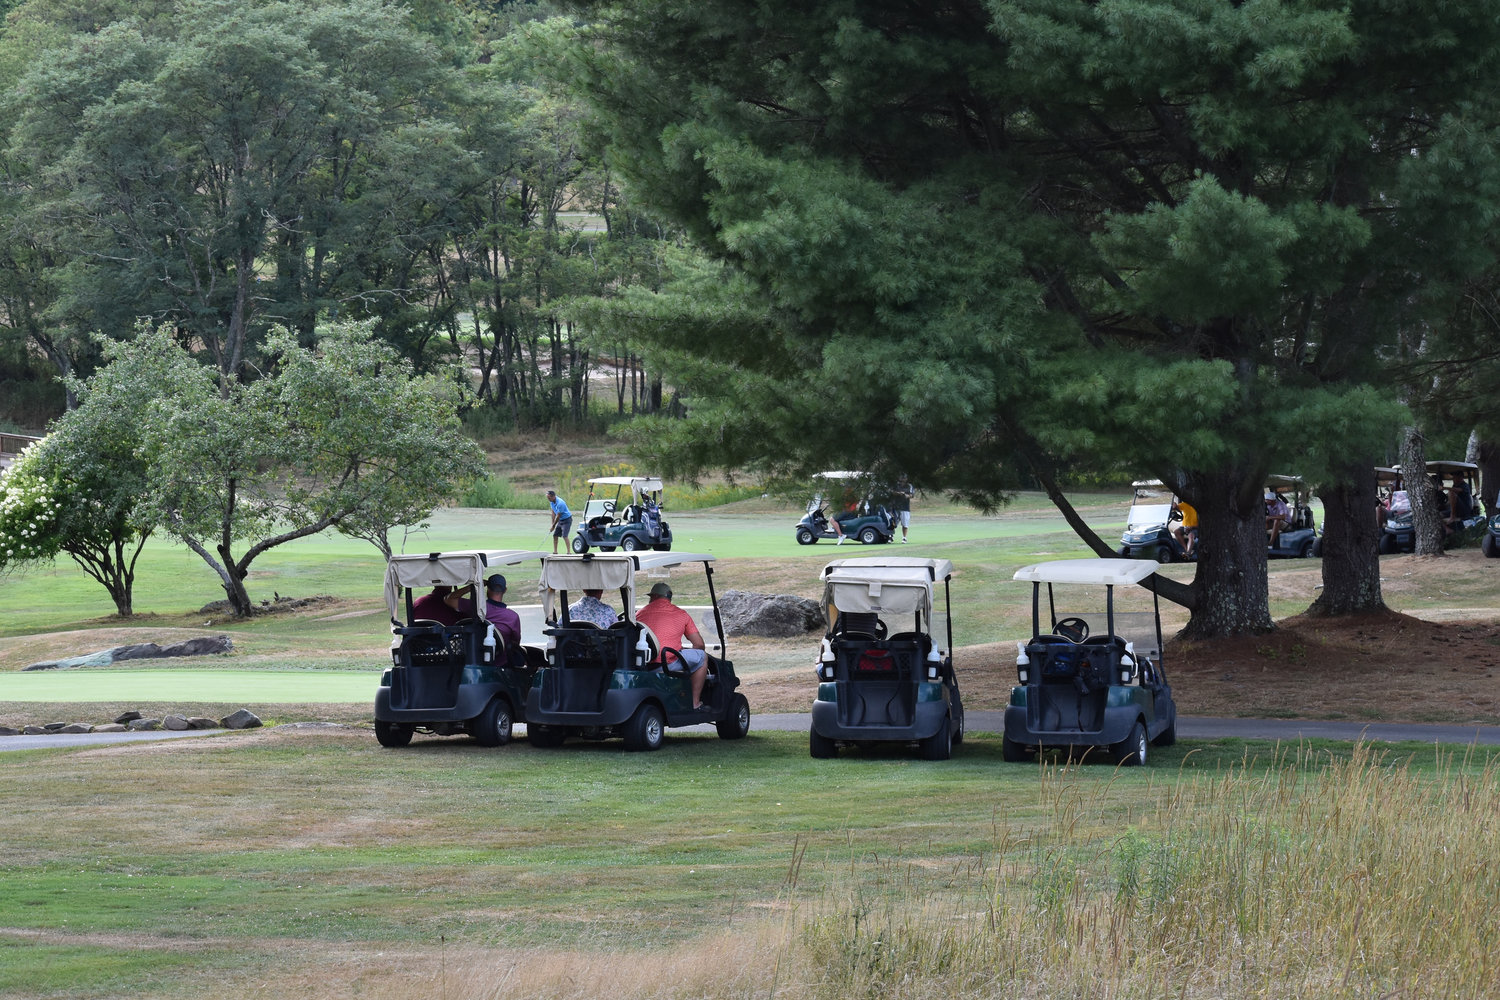 Carts lined the trees all around the 17th hole in anticipation for the Championship Flight finale.